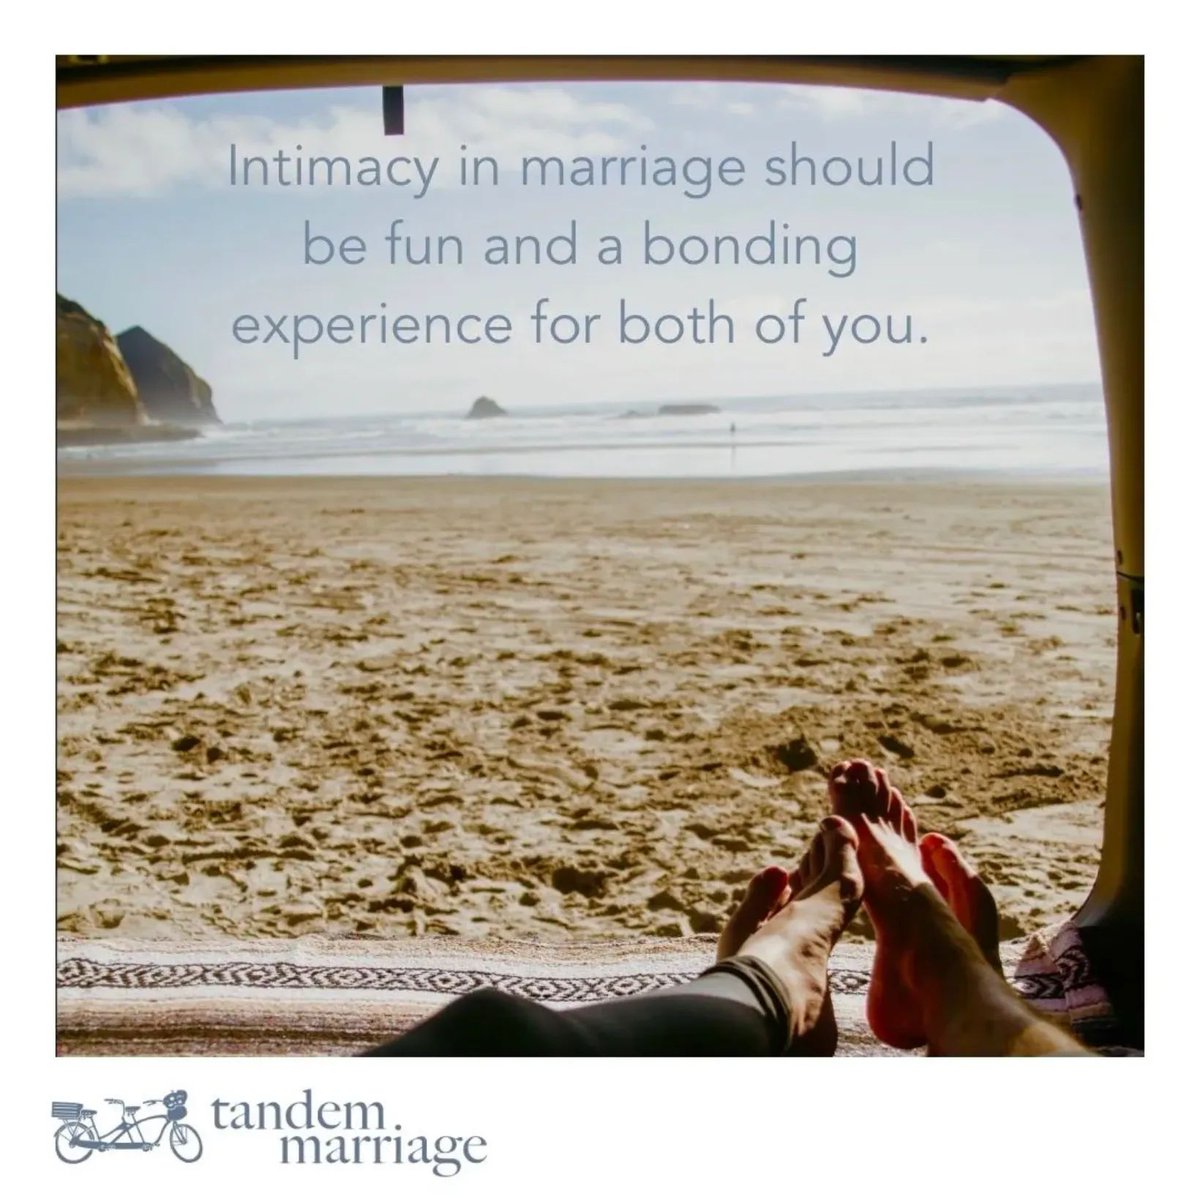 Intimacy in marriage should be a fun and bonding experience for both of you.
 
If it is not, why would you leave things the way they are?
 
TandemMarriage.com/sex
 
#TeamUs #MarriageGoals #MarriageEducation